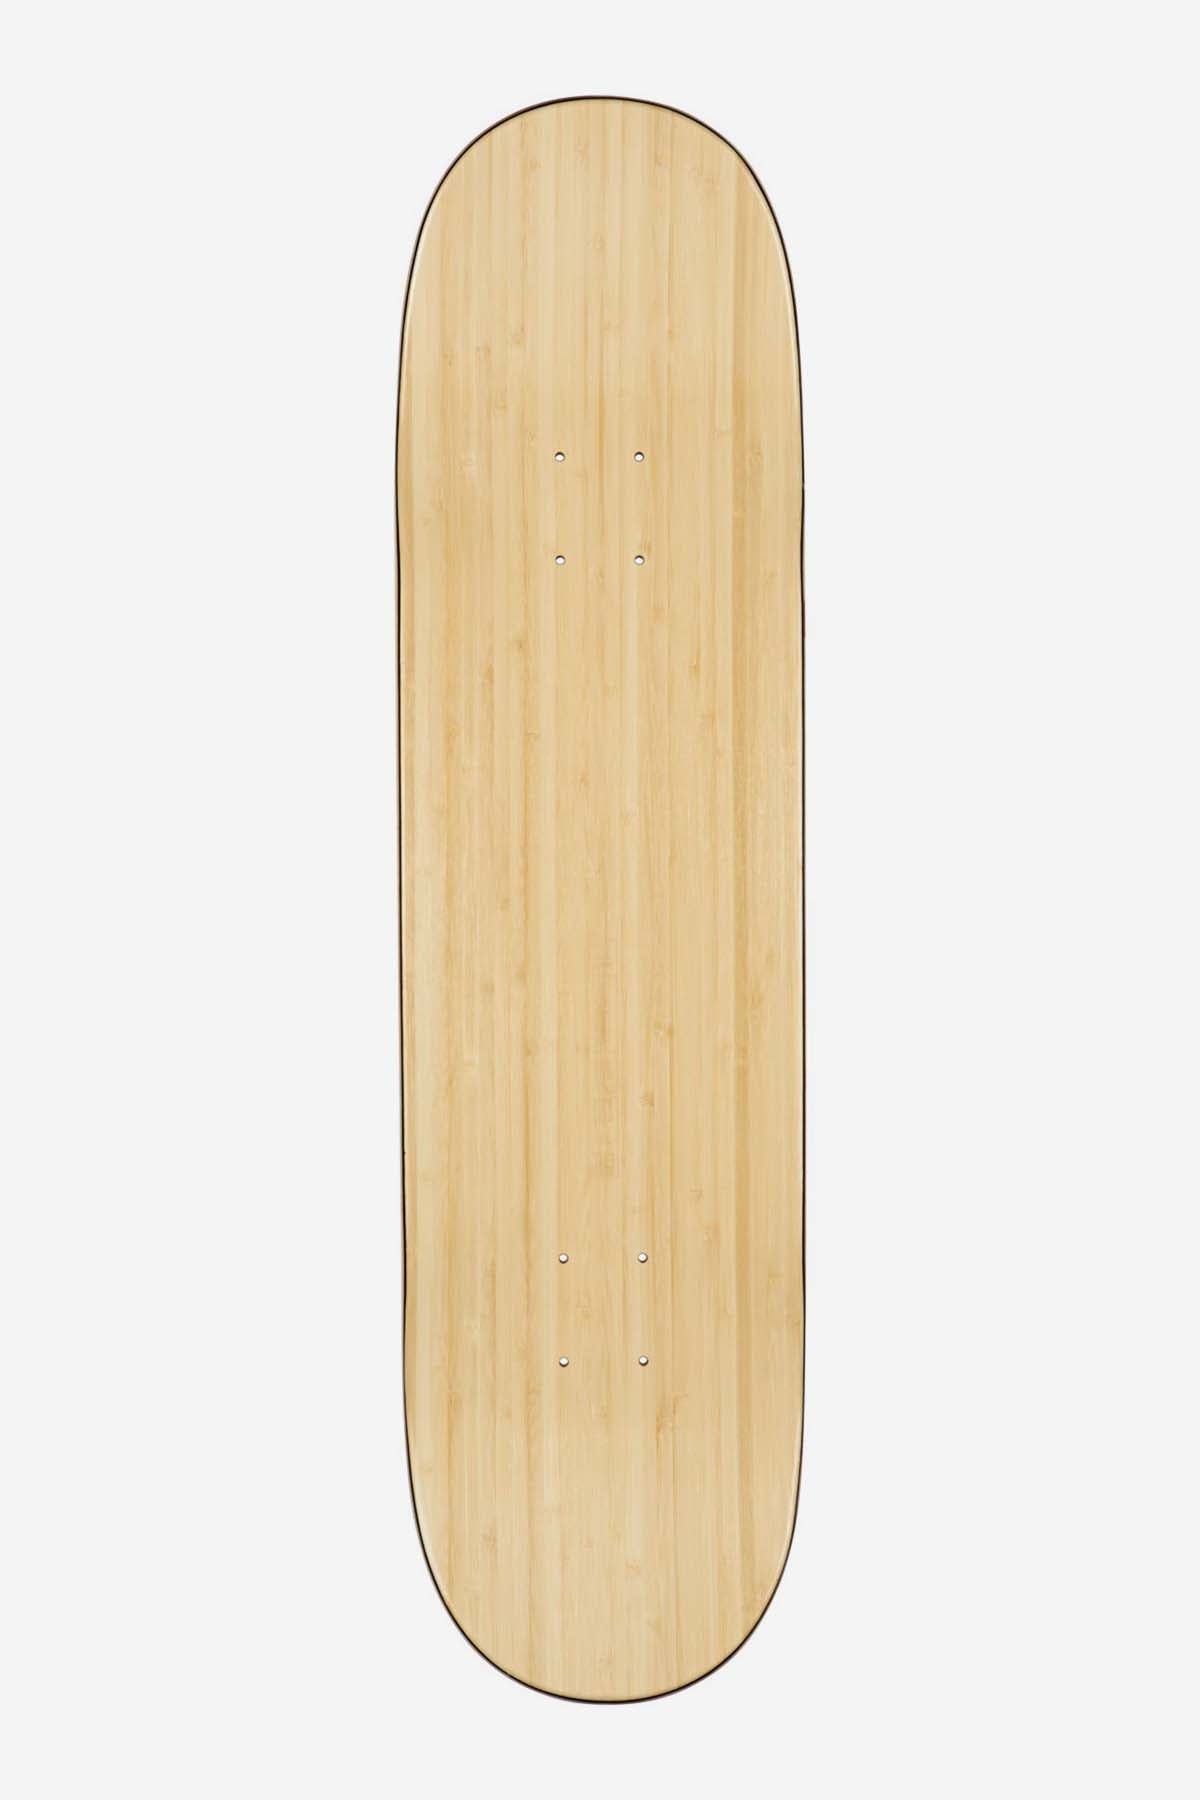 G3 Check, Please 8.375" Deck - Bamboo/Turbo